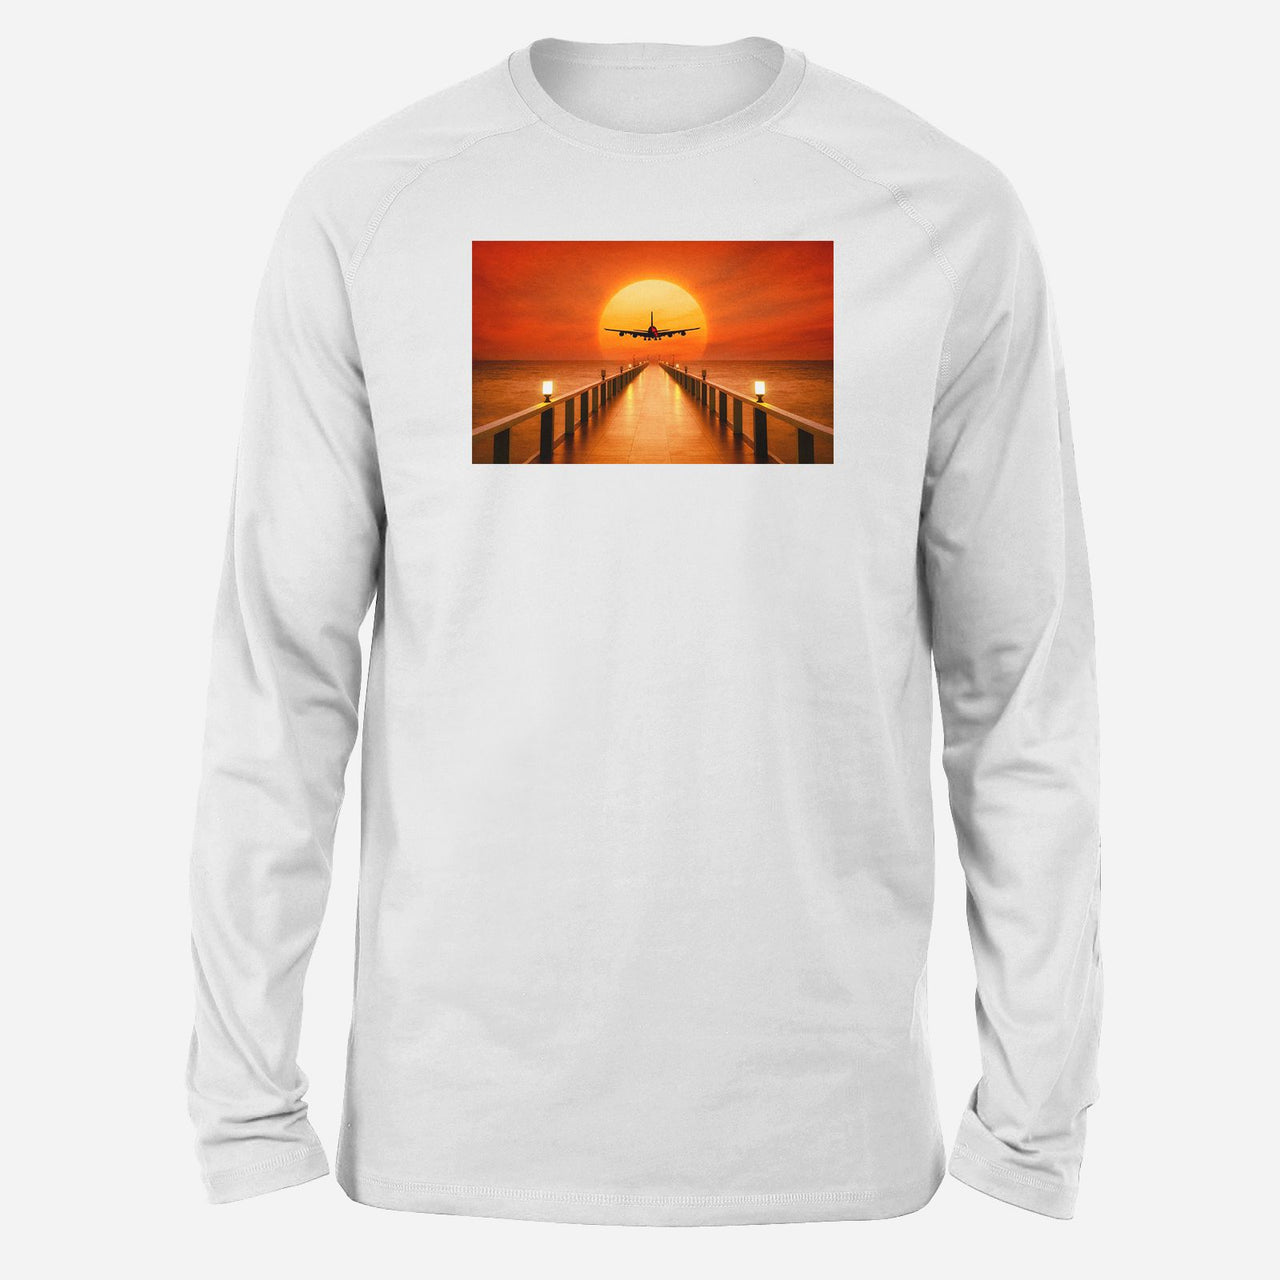 Airbus A380 Towards Sunset Designed Long-Sleeve T-Shirts